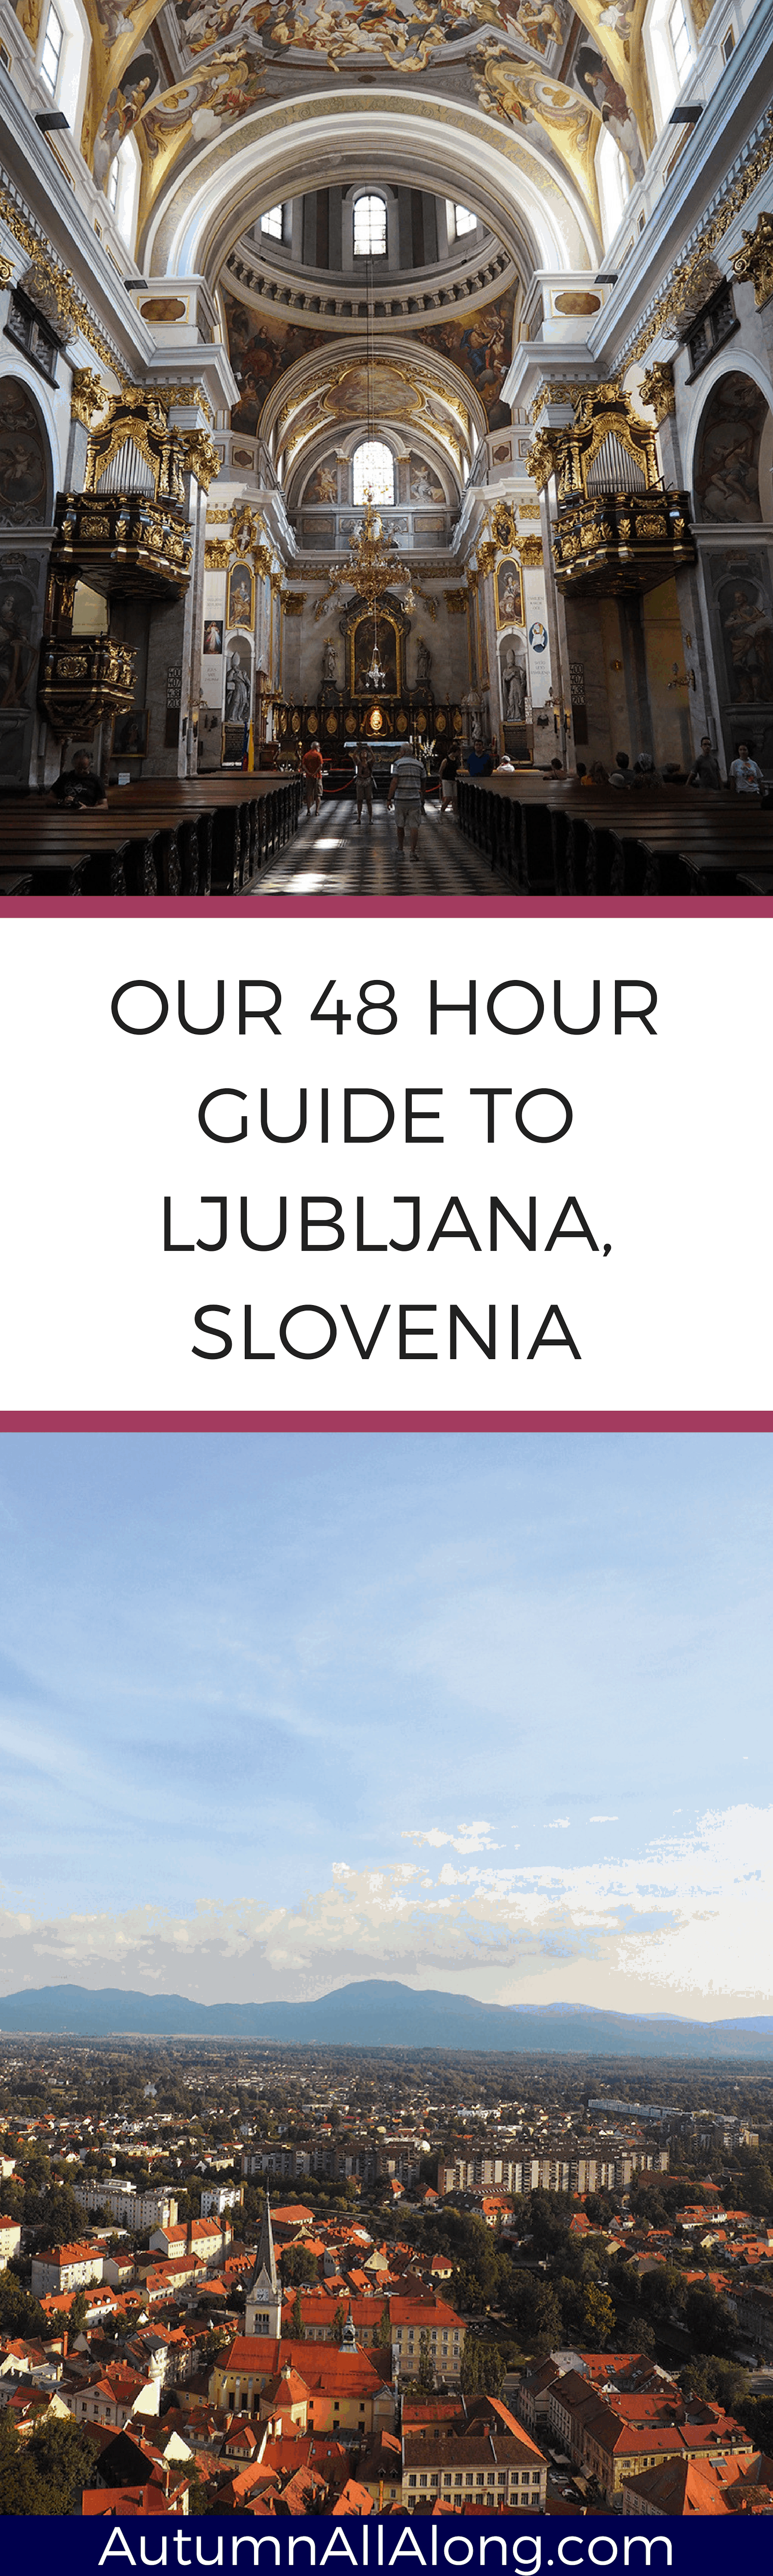 Out of all of the places we've traveled, we found Ljubljana, Slovenia to be our favorite. Here is our 48 hour guide to hotels, restaurants, and activities to do around Slovenia's capitol. | via Autumn All Along